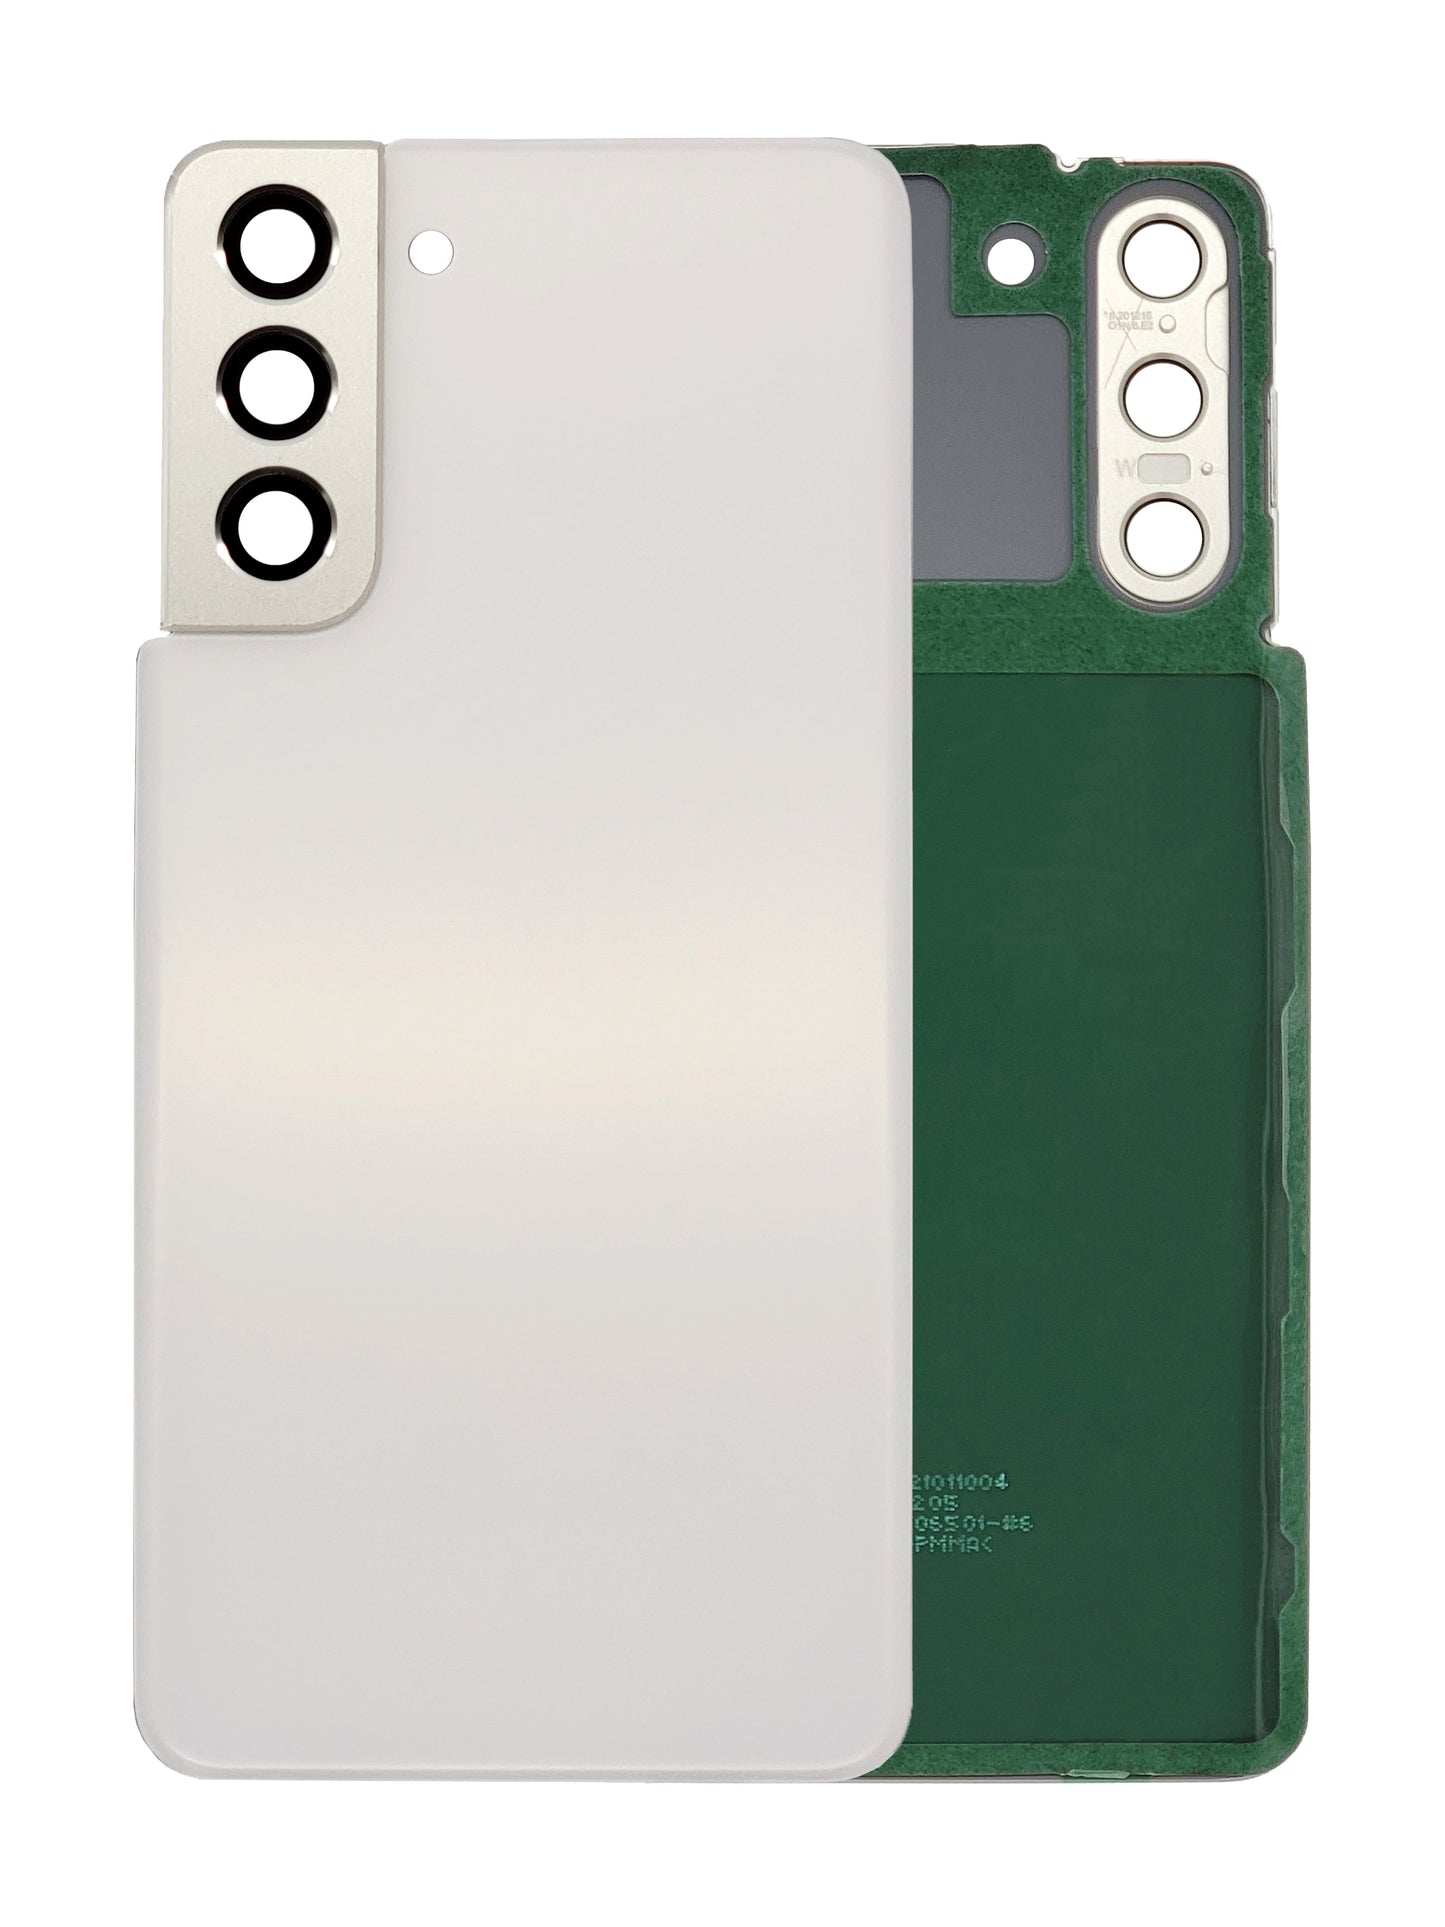 SGS S21 Back Cover (White)